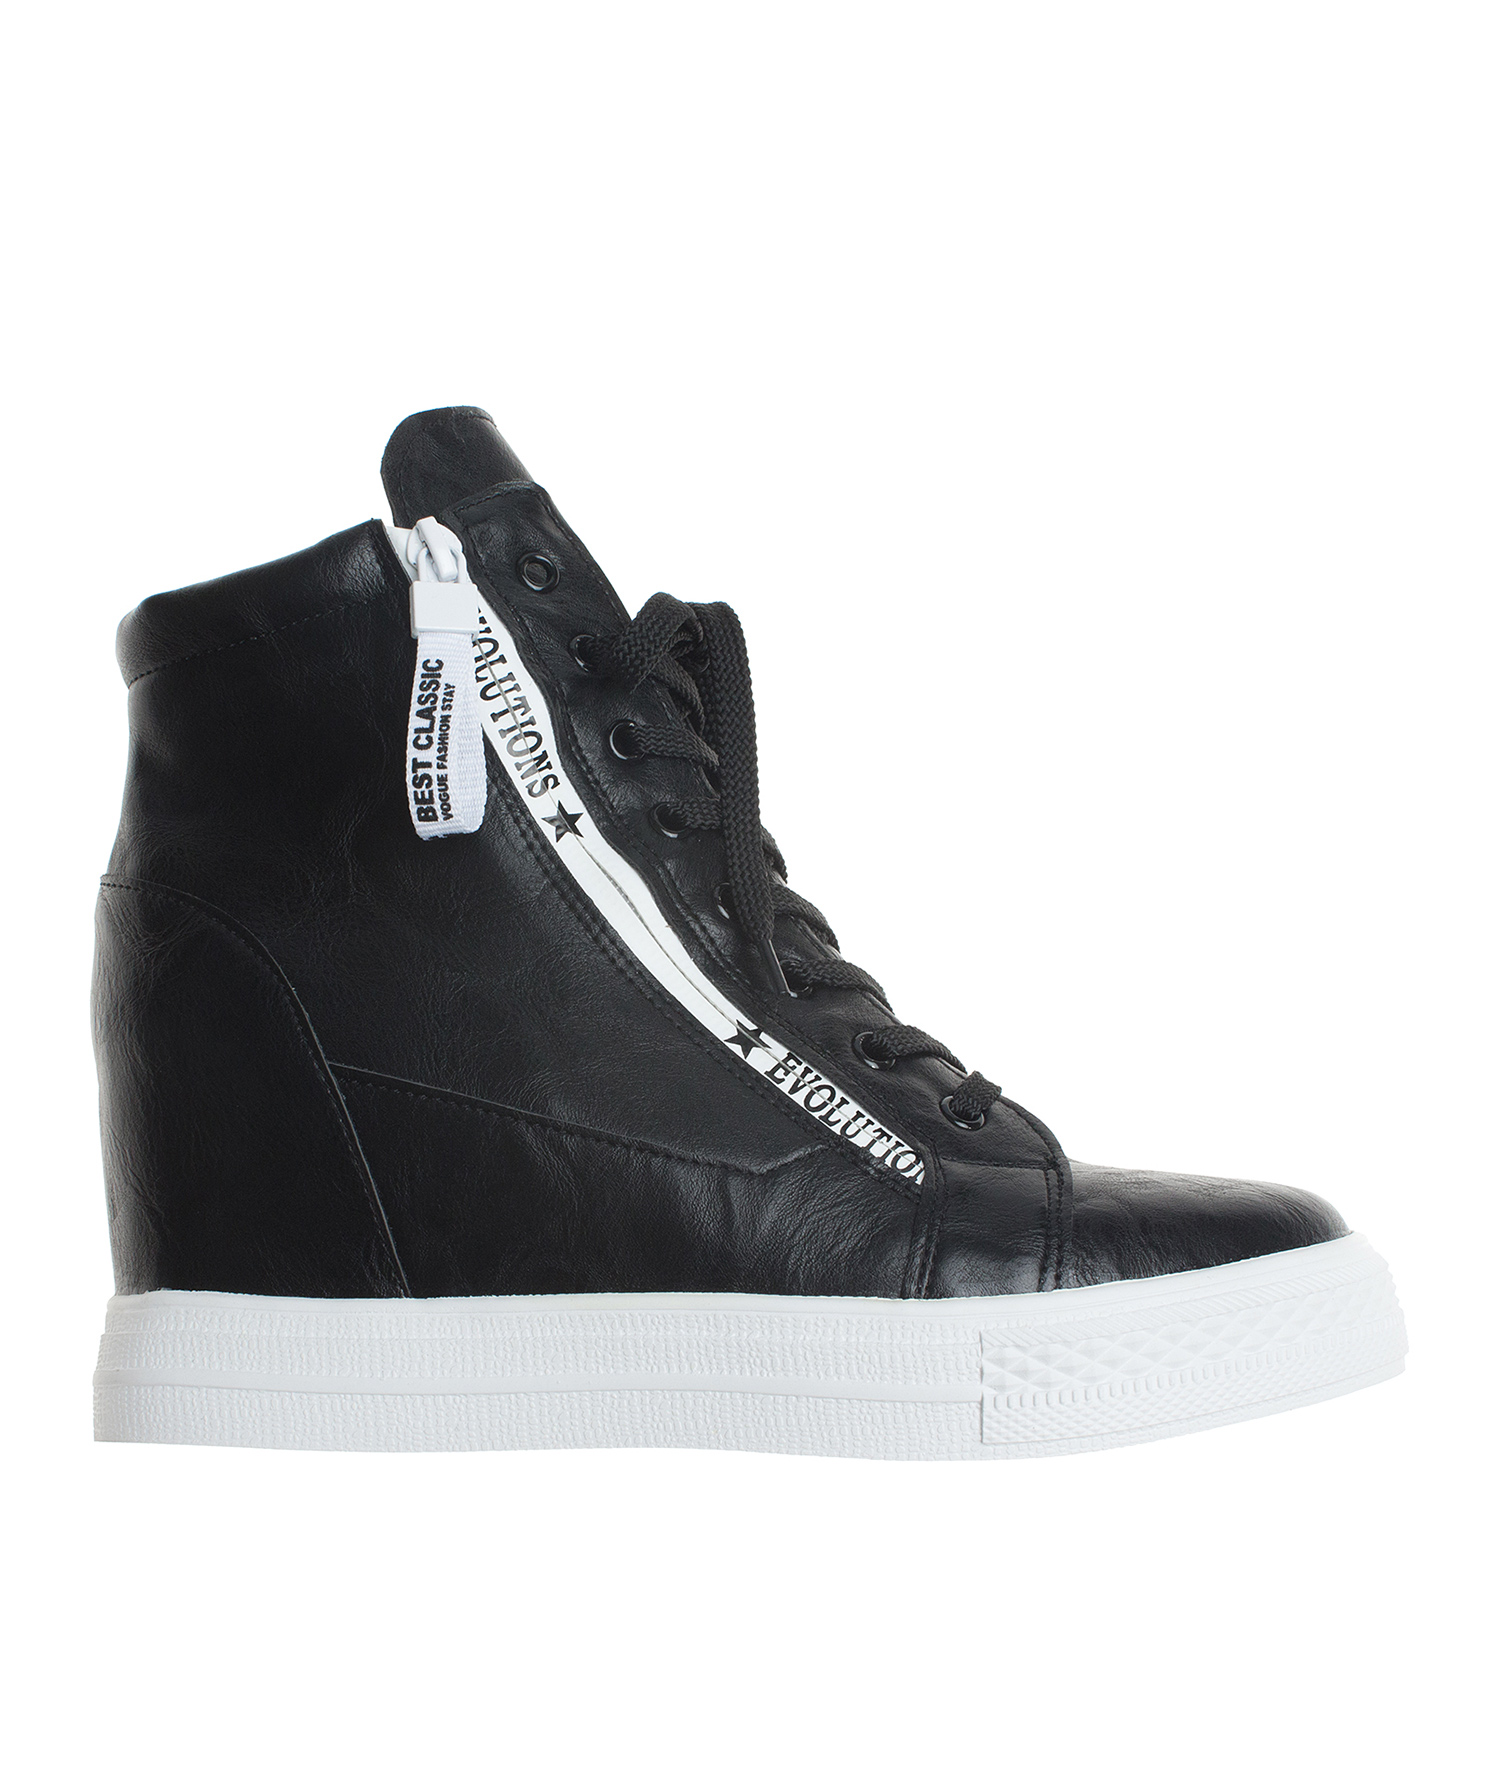 high top wedge sneakers for women